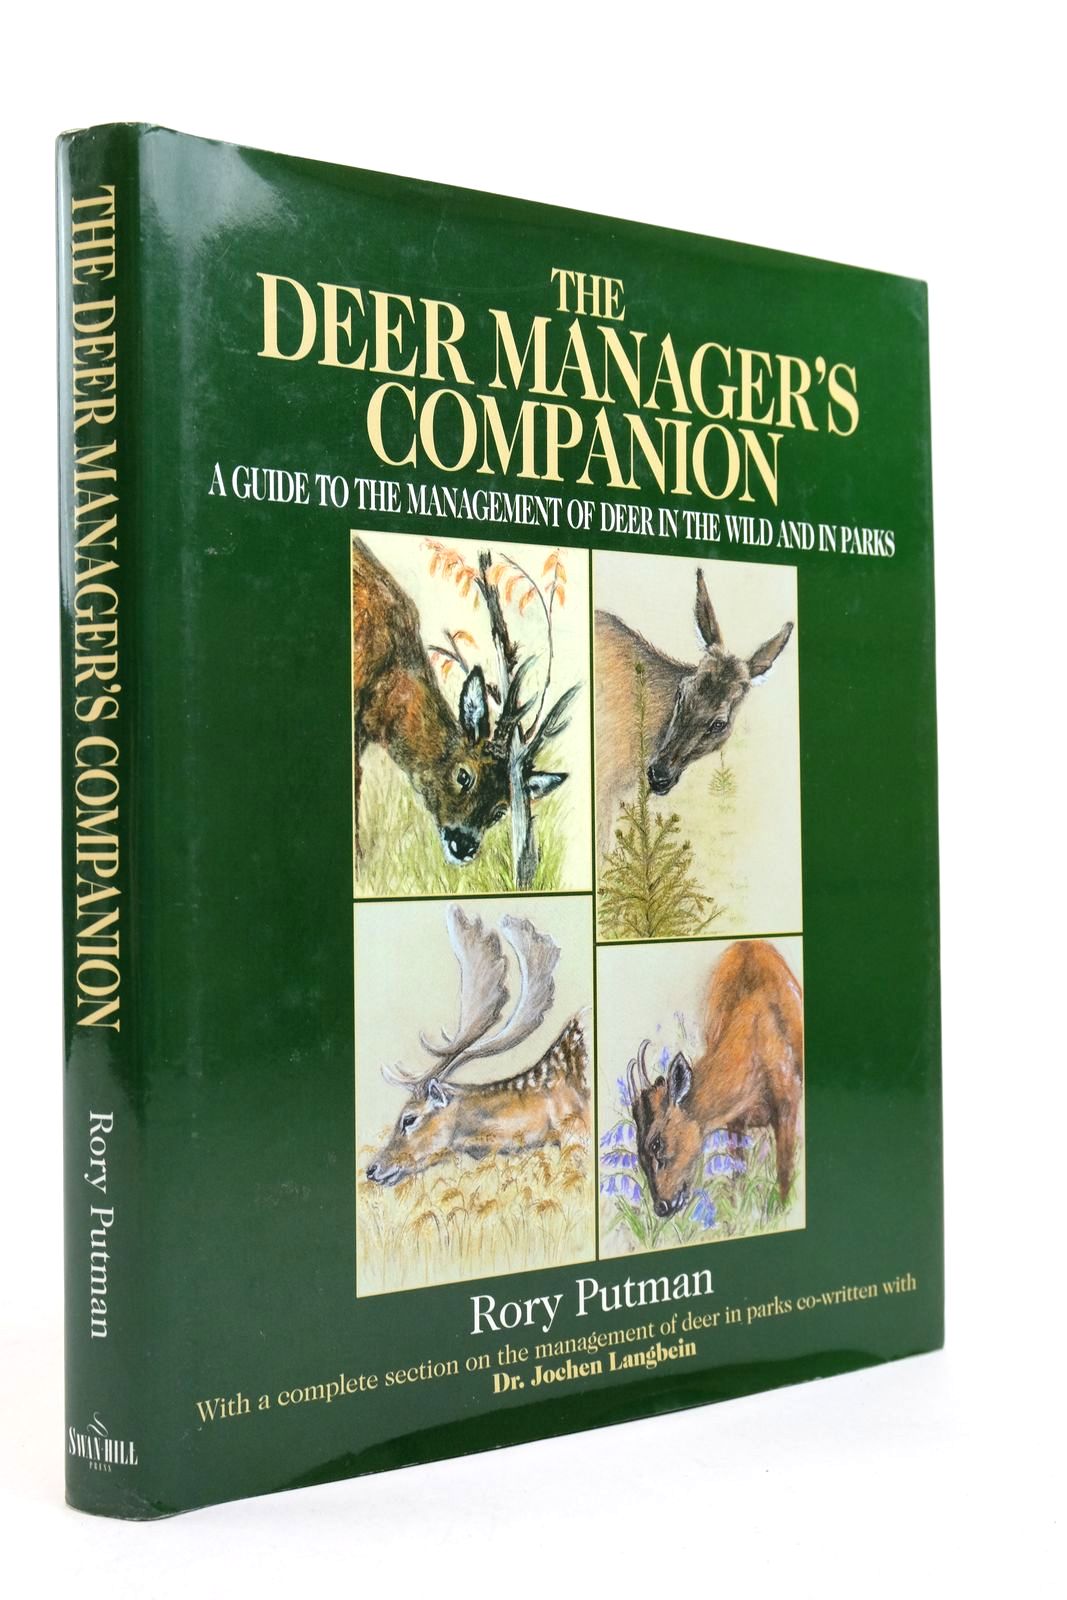 Photo of THE DEER MANAGER'S COMPANION: A GUIDE TO THE MANAGEMENT OF DEER IN THE WILD AND IN PARKS written by Putman, Rory illustrated by Crighton, Catherine published by Swan Hill Press (STOCK CODE: 2139733)  for sale by Stella & Rose's Books